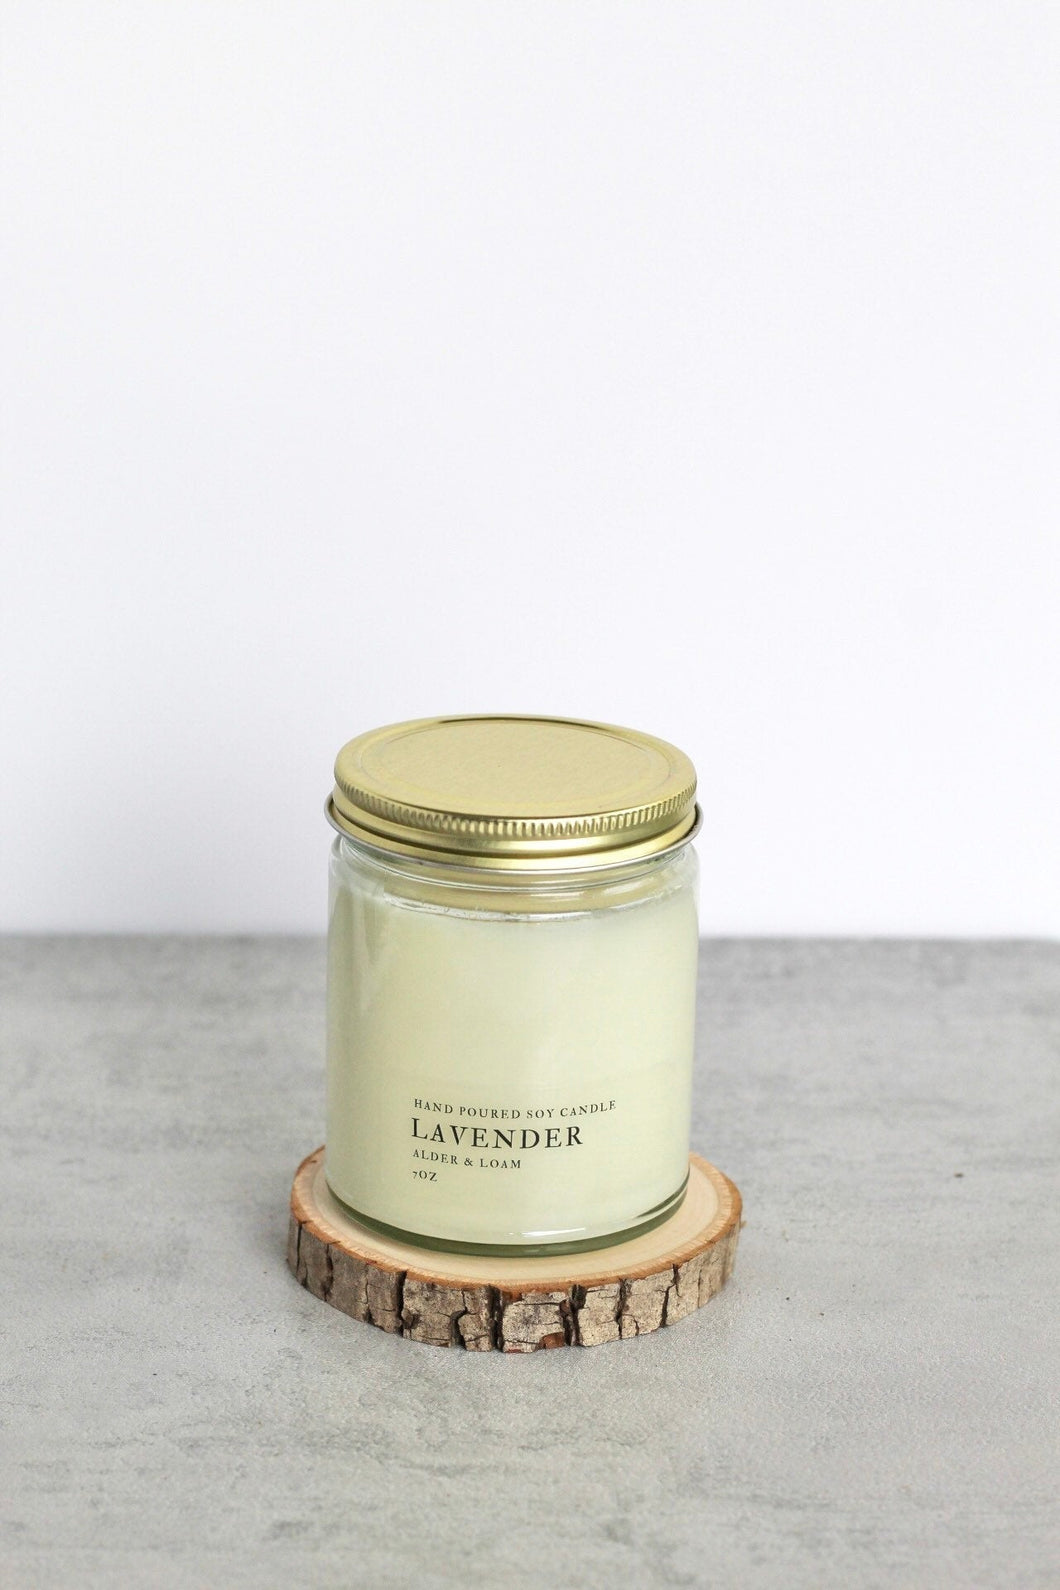 Lavender Soy Candle, Hand Poured, Natural, Eco Friendly, Earthy Scent, 7 oz Jar